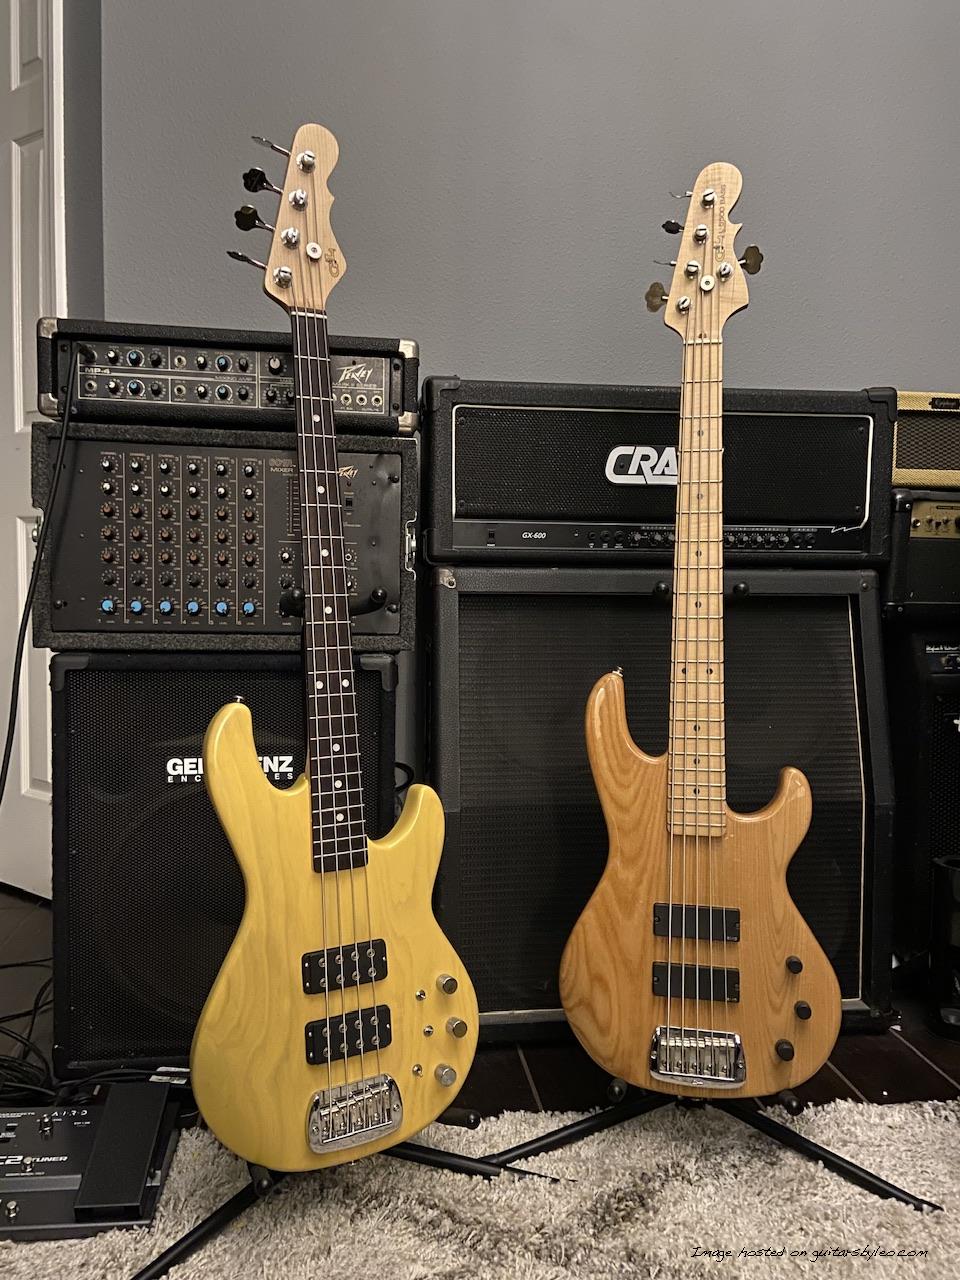 G&L L-2000 and G&L L-5500